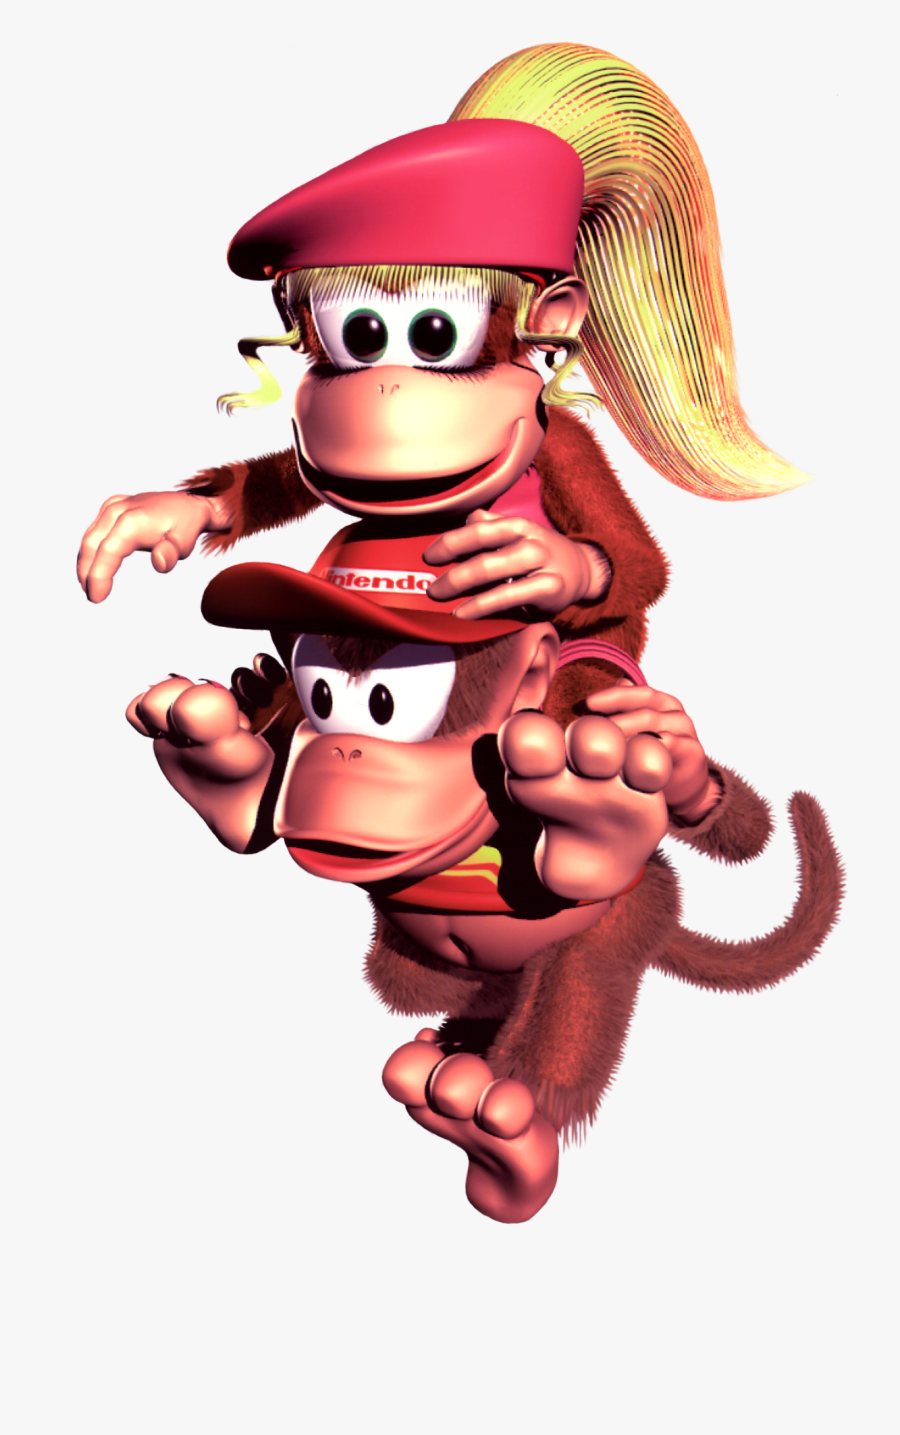 Transparent Donkey Kong Png - Donkey Kong Country 2 Diddy Kong, Transparent Clipart